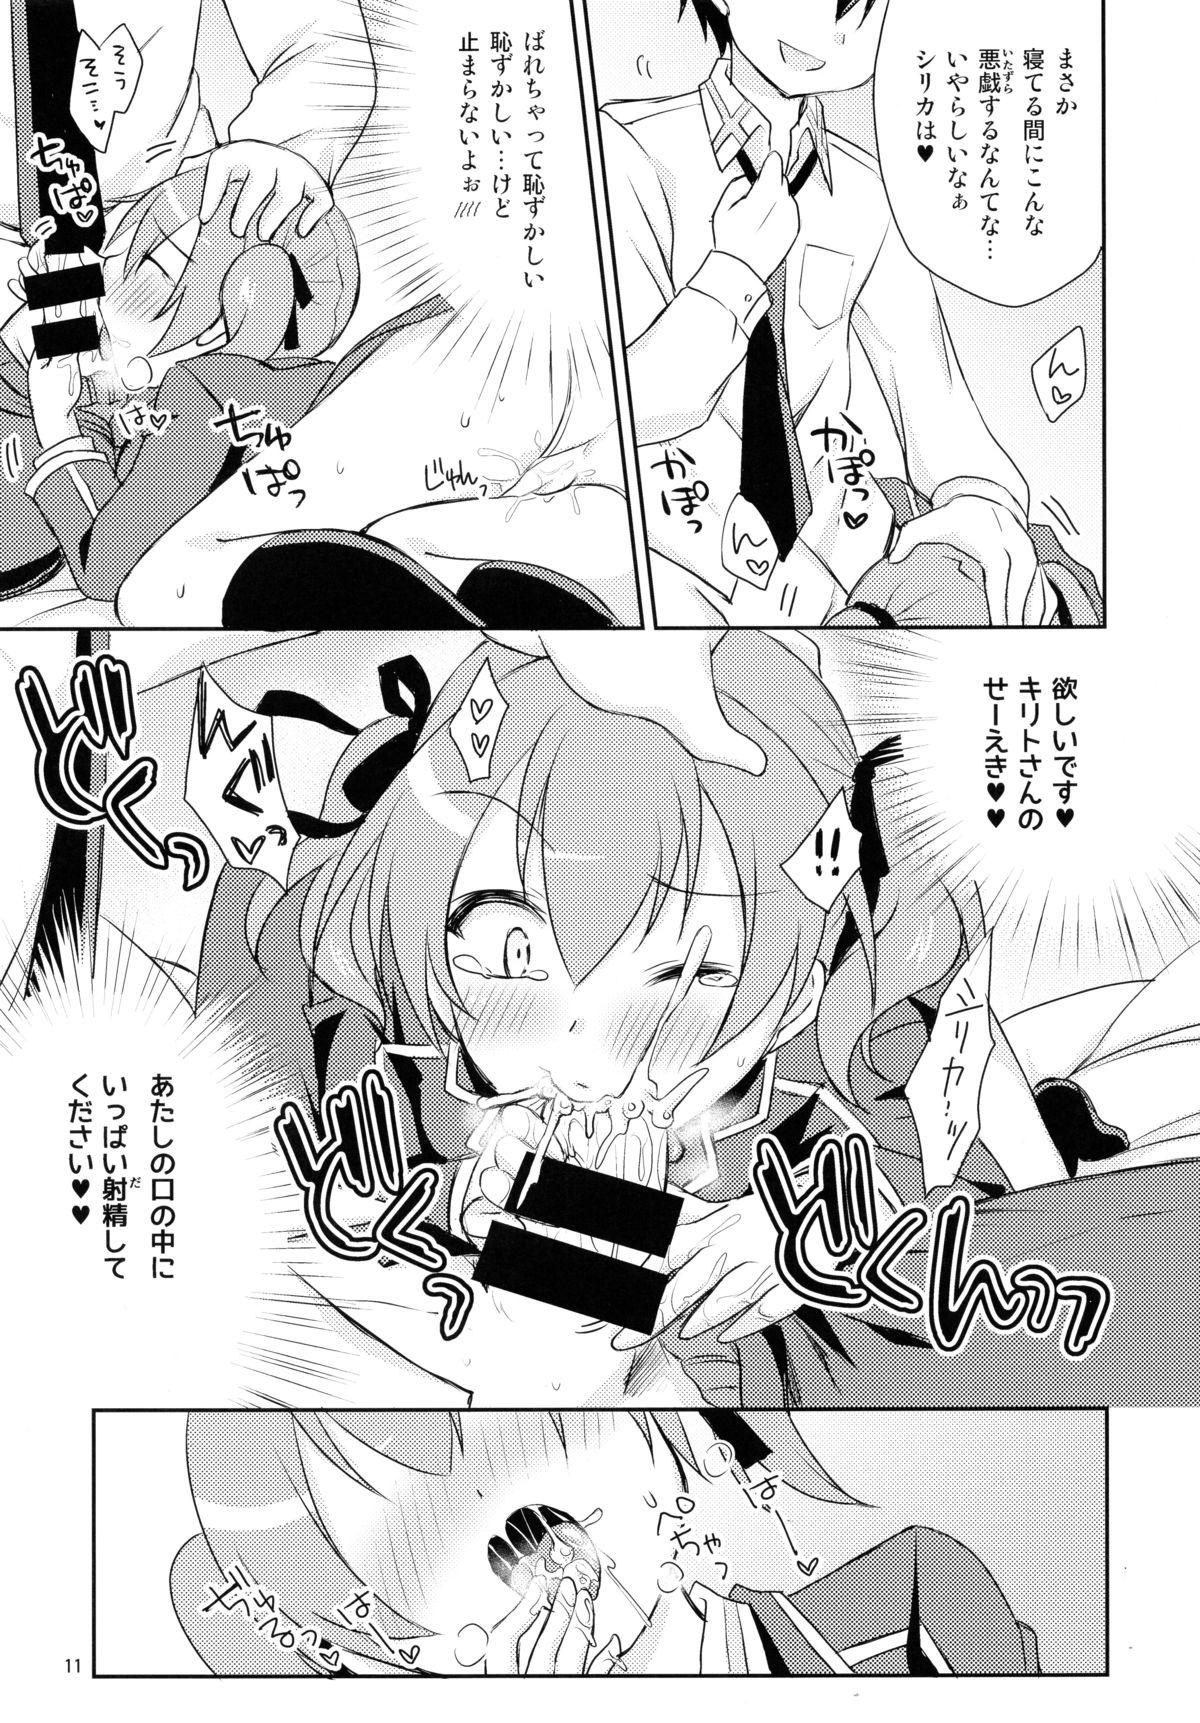 Homemade Itazura Silica-chan - Sword art online Adult - Page 11